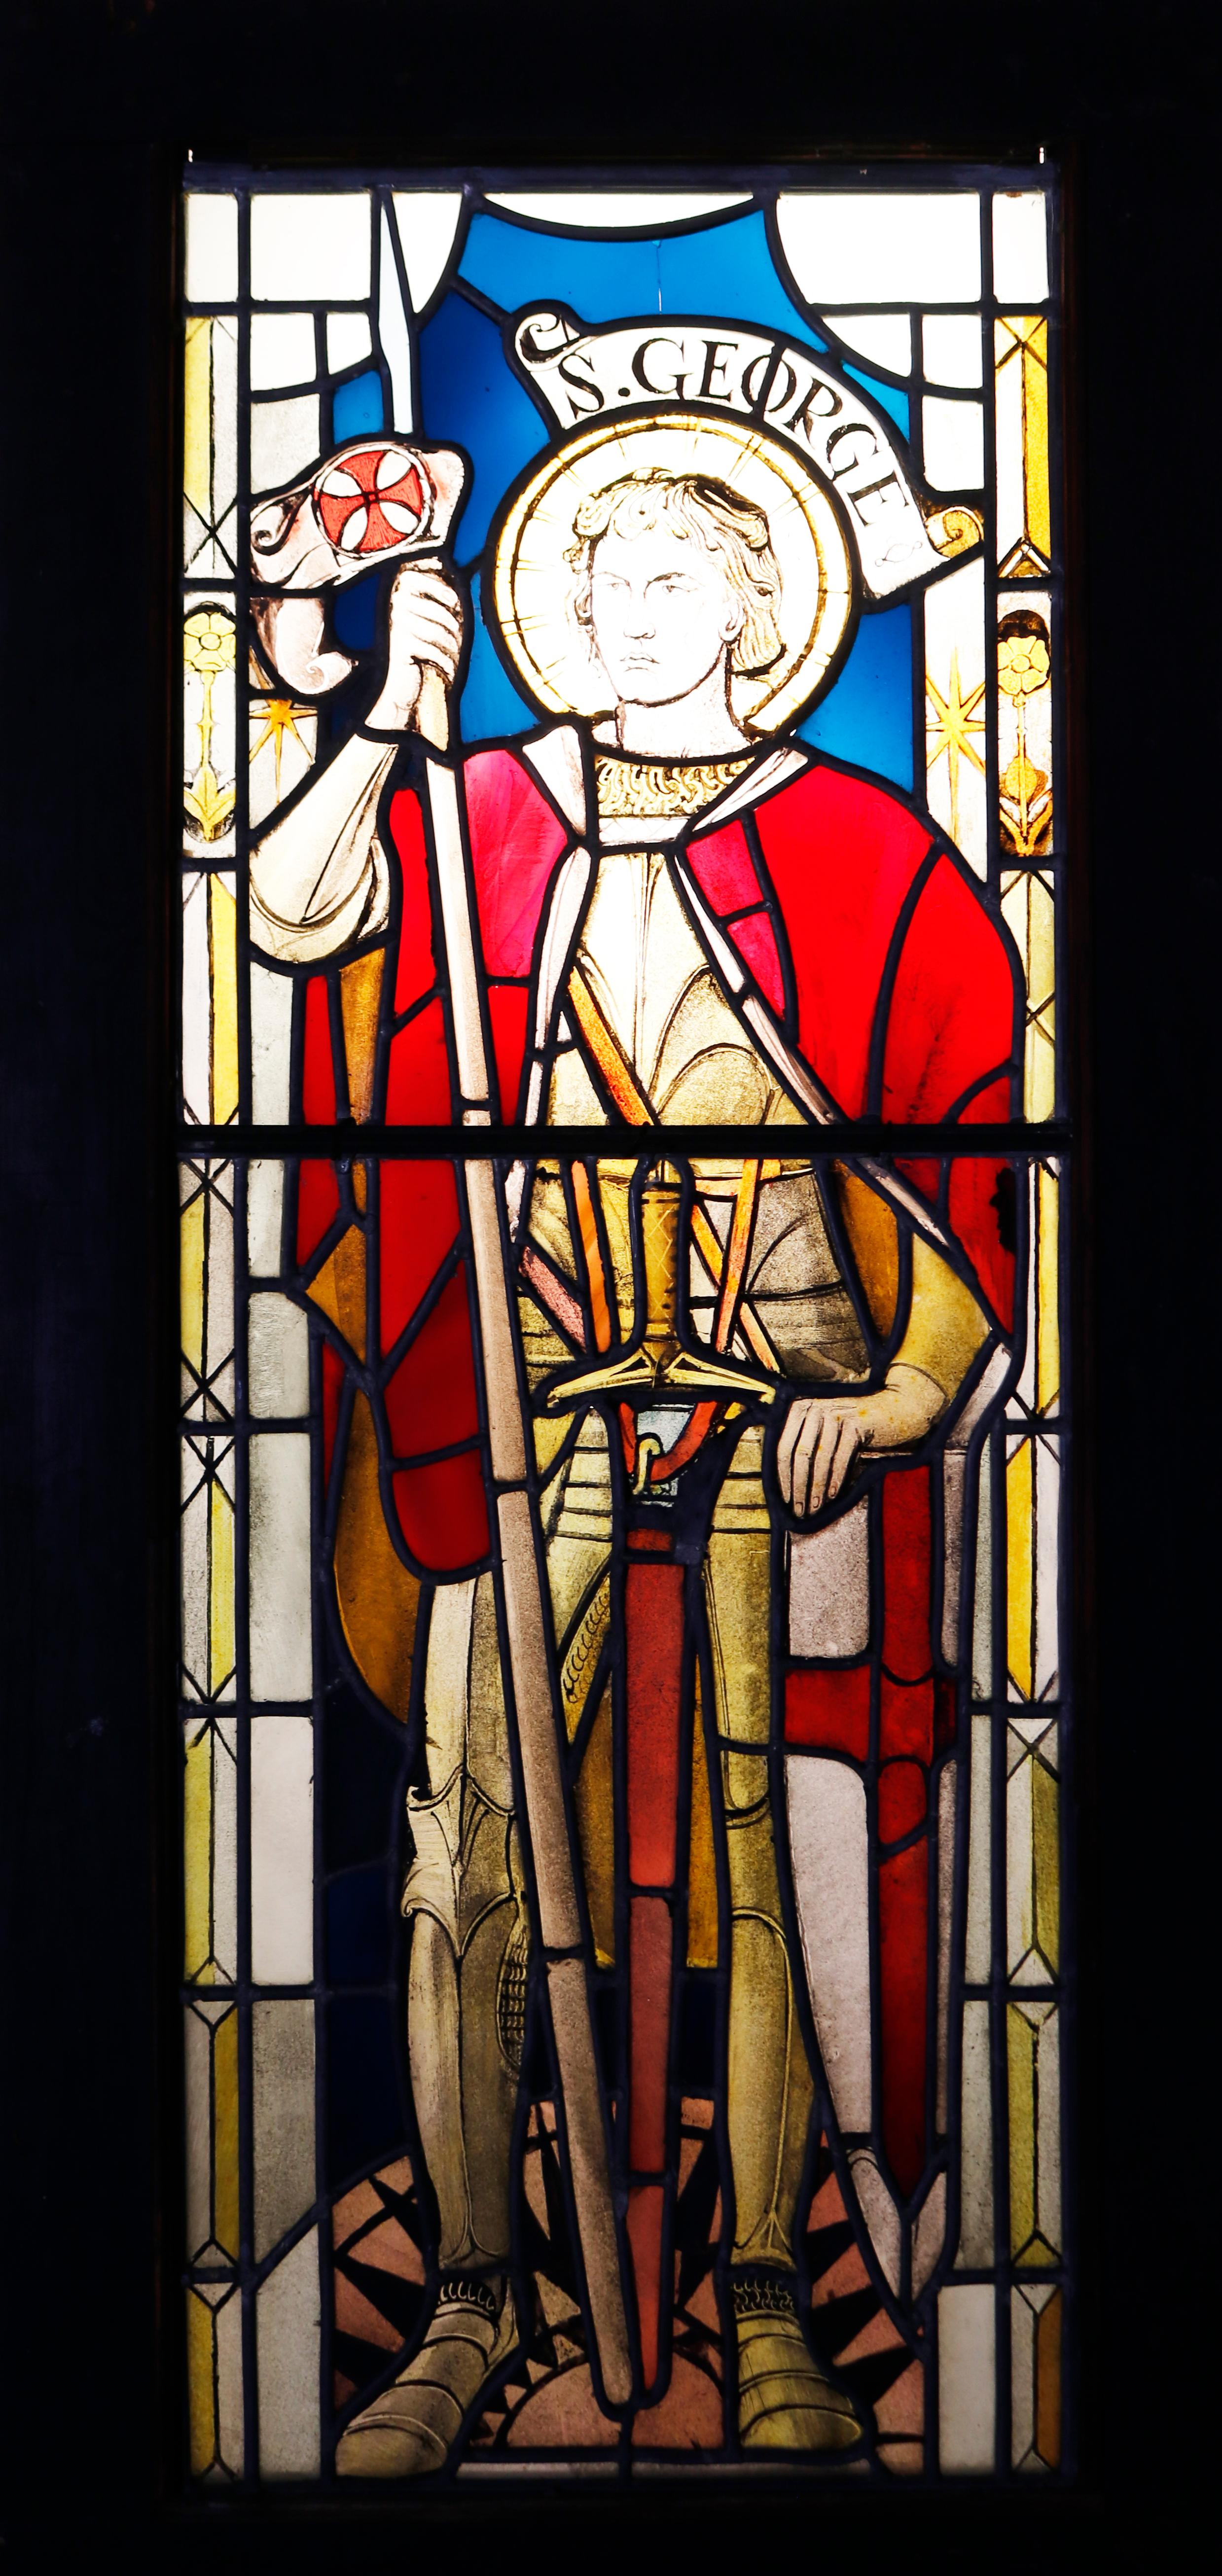 Antique Stained Glass Window of St George 2